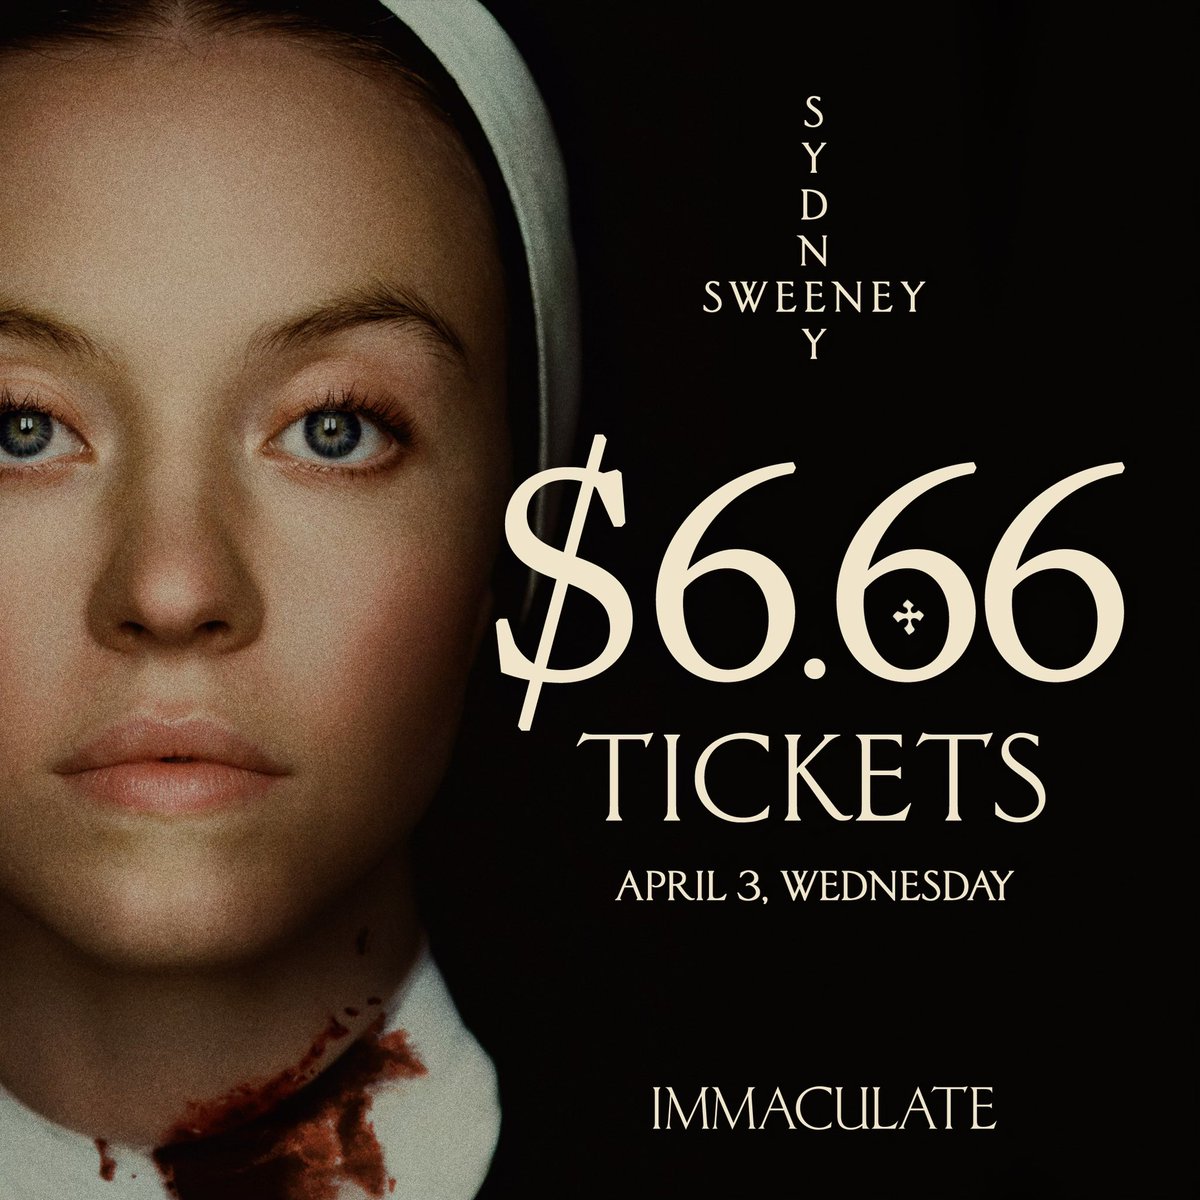 This Wednesday, experience IMMACULATE for the devilish price of $6.66. Tickets will be available at participating theaters (@AMCTheatres, @RegalMovies, @Marcus_Theatres, @HarkinsTheatres) across all showtimes on Wednesday only: immaculate.film